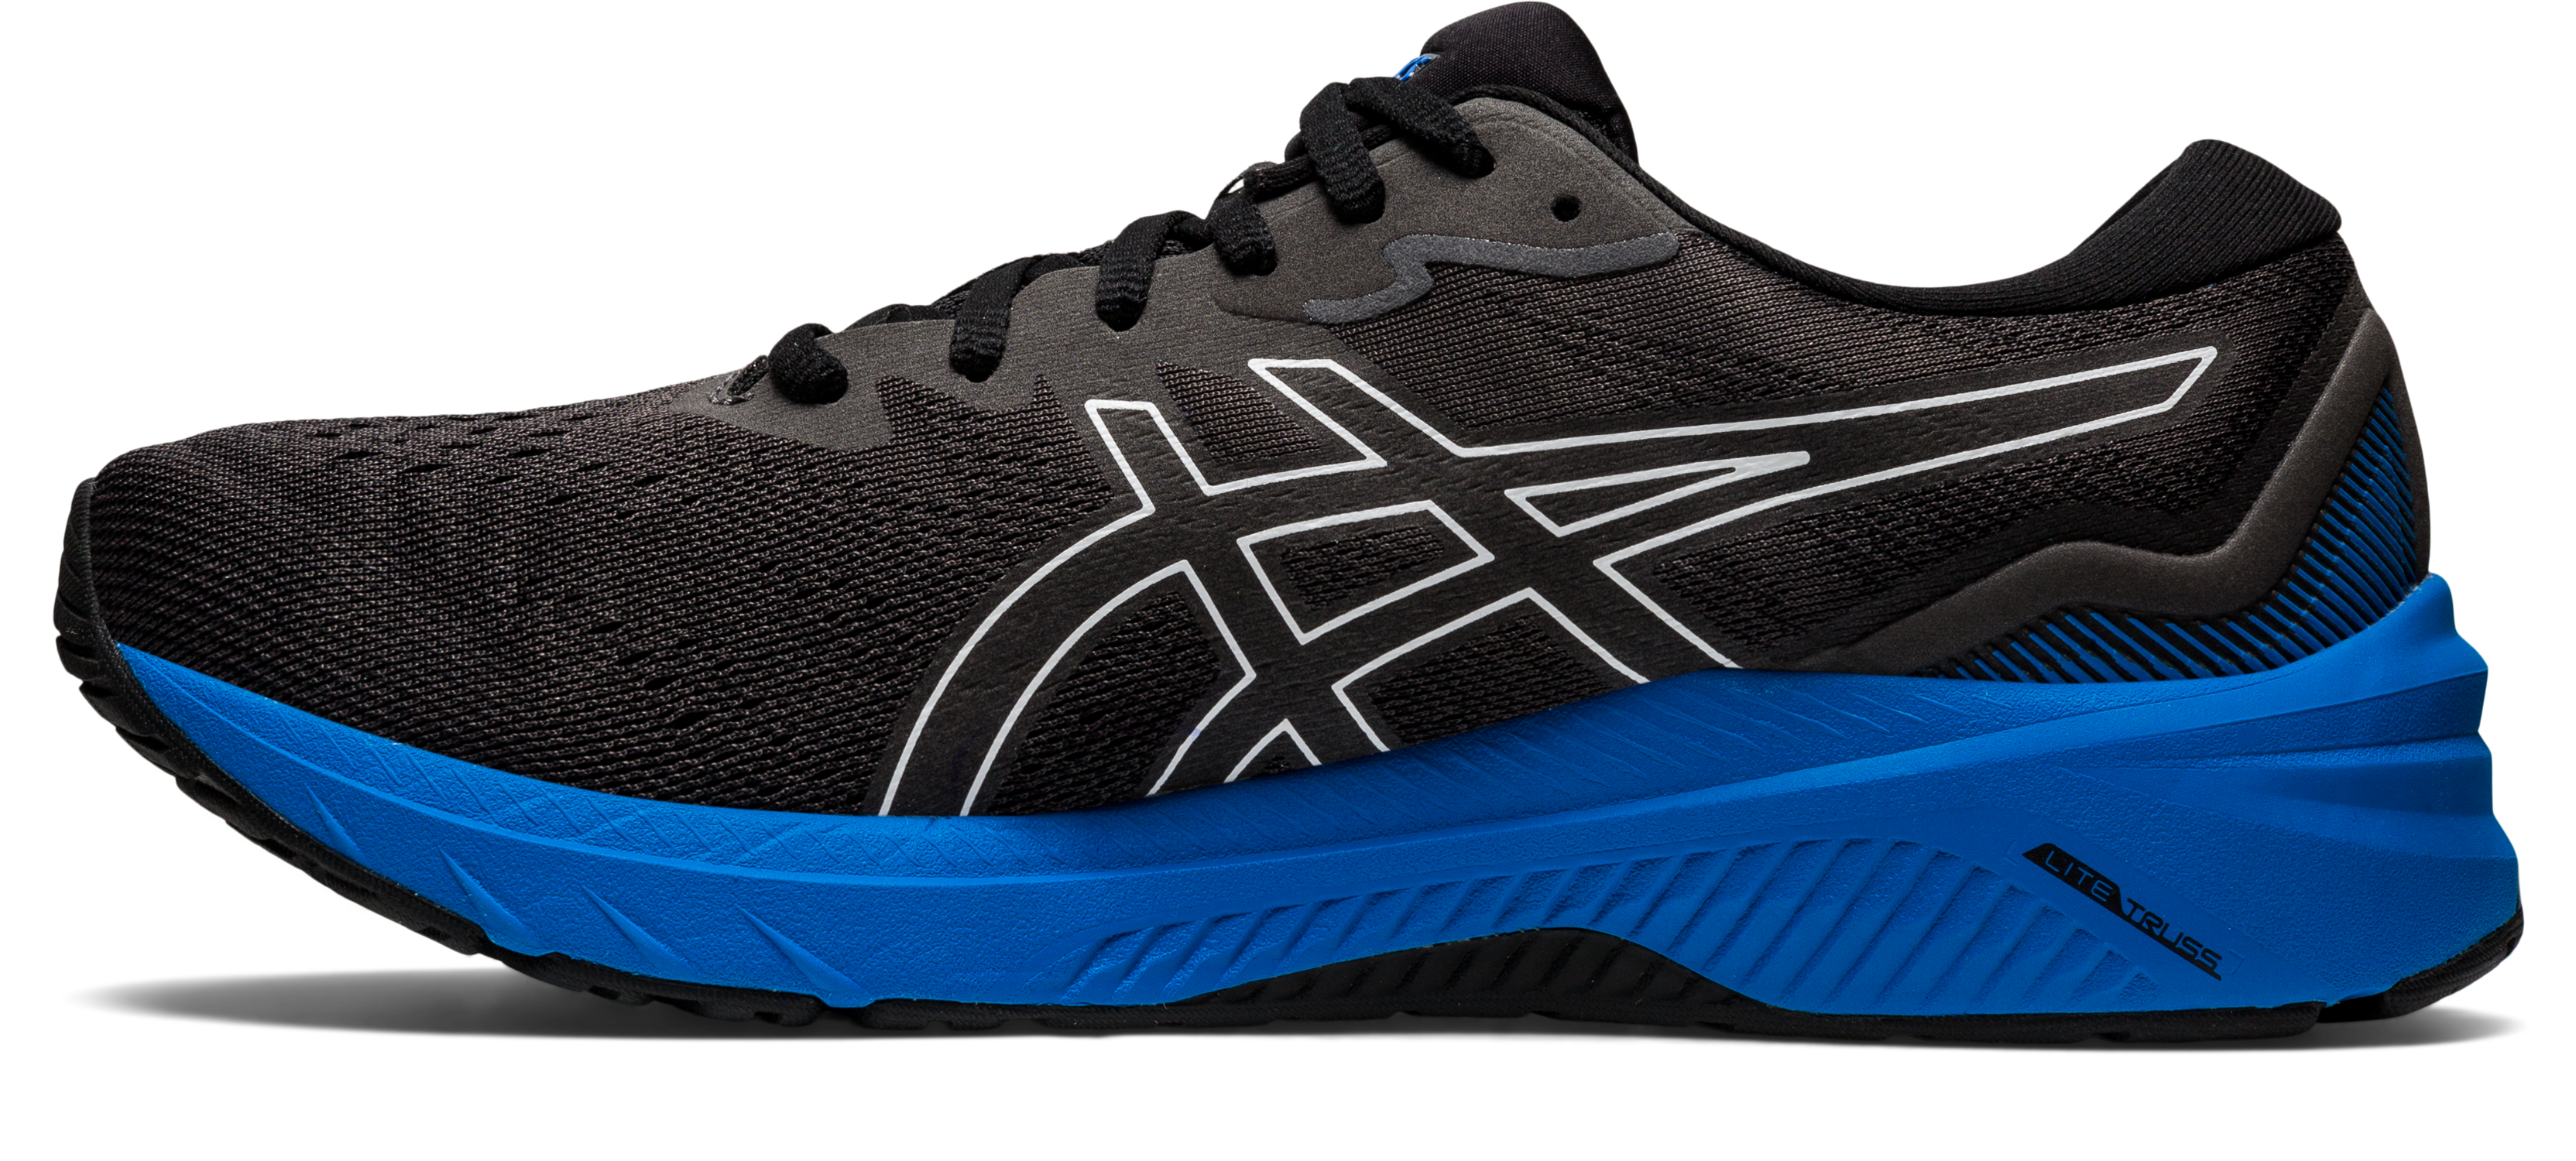 Asics Men's GT-1000 11 Running Shoes in Black/Electric Blue